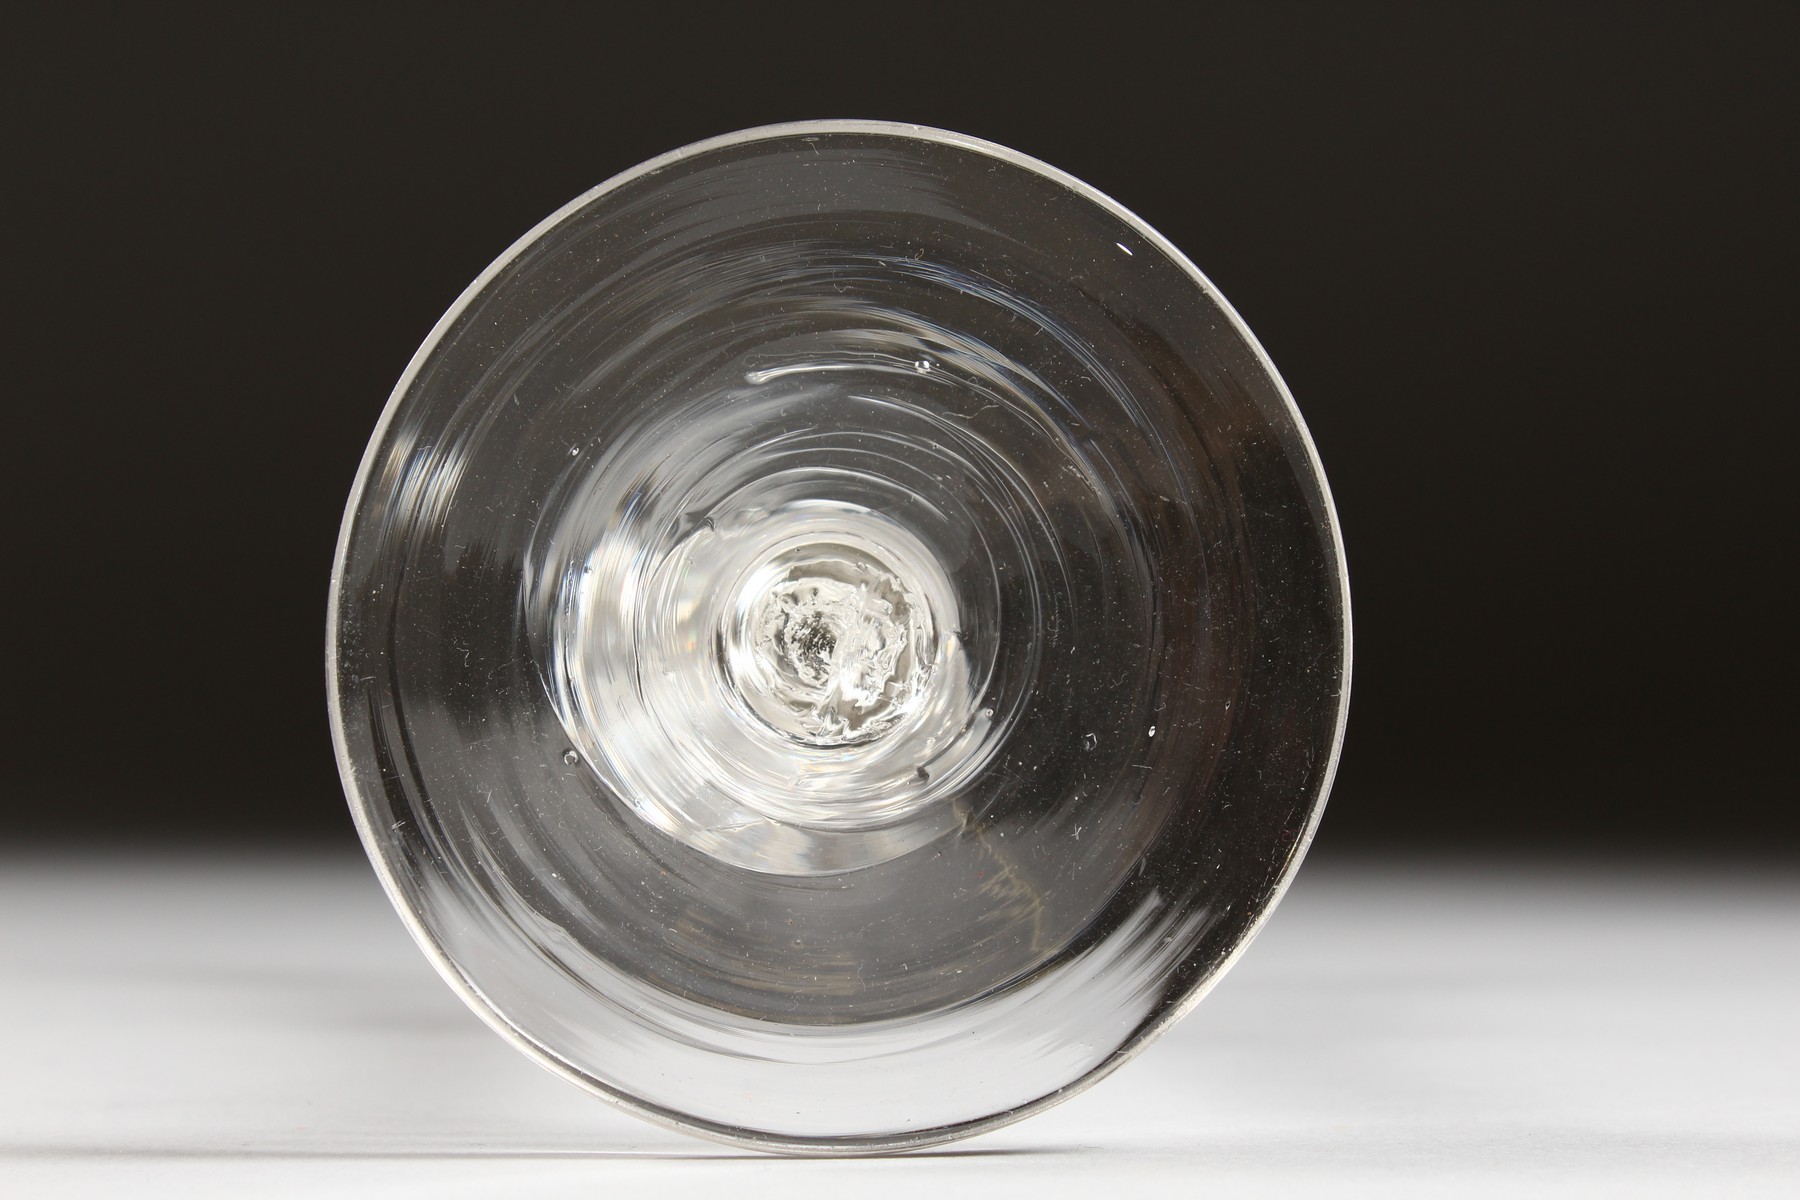 A GEORGIAN WINE GLASS with inverted bell shaped bowl and air twist stem. 6.5ins high. - Image 4 of 4